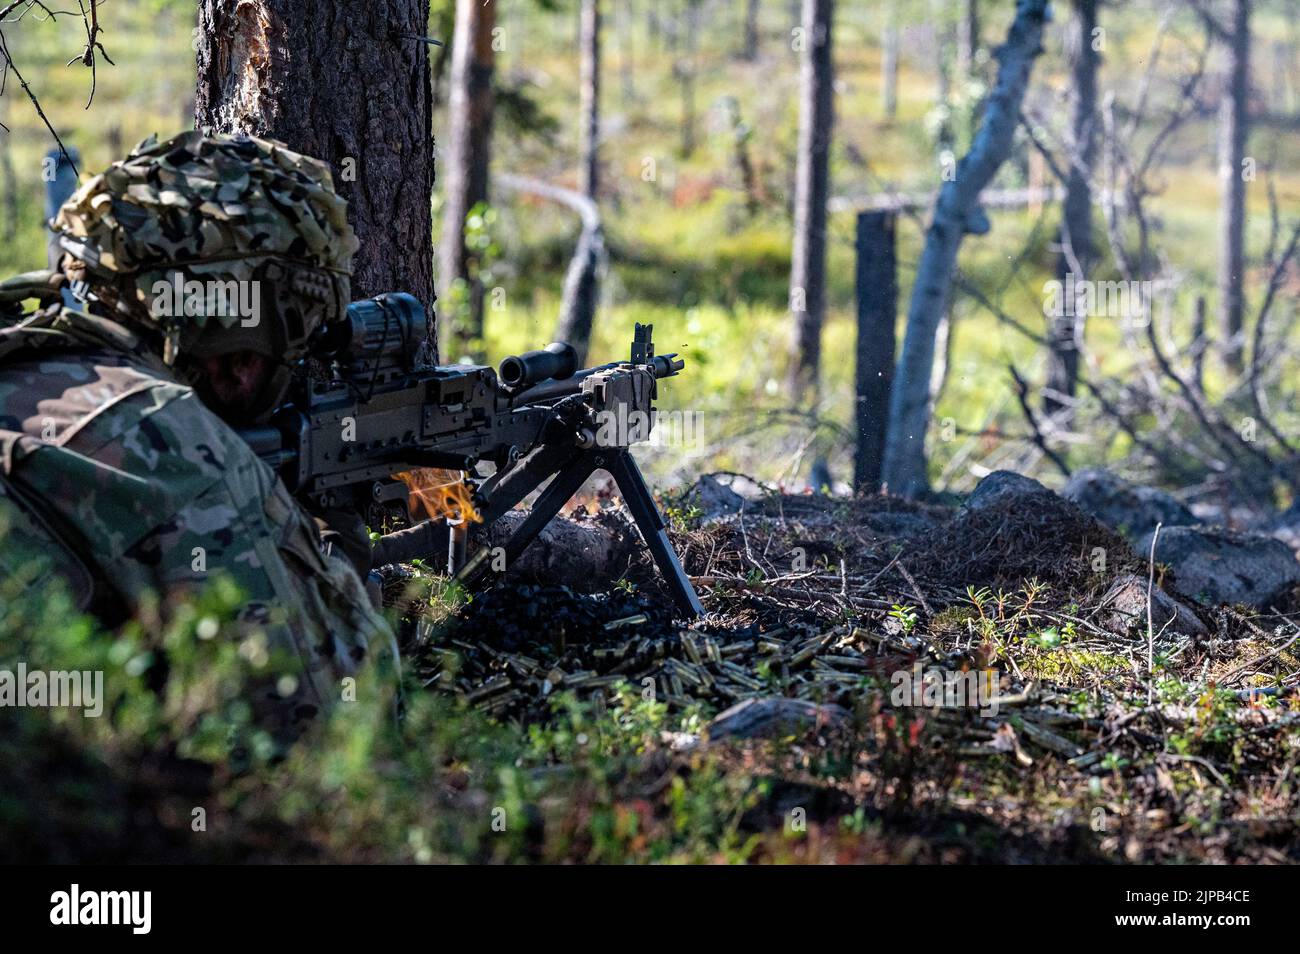 A U.S. Soldier with 1st Battalion, 26th Infantry Regiment, 2nd Brigade Combat Team, 101st Airborne Division (Air Assault) fires an M249 squad automatic weapon during a company combined arms live-fire exercise as part of joint training between the U.S. Army and Finnish army at Rovaniemi, Finland, Aug. 10, 2022. (U.S. Army photo by Capt. Tobias Cukale) Stock Photo